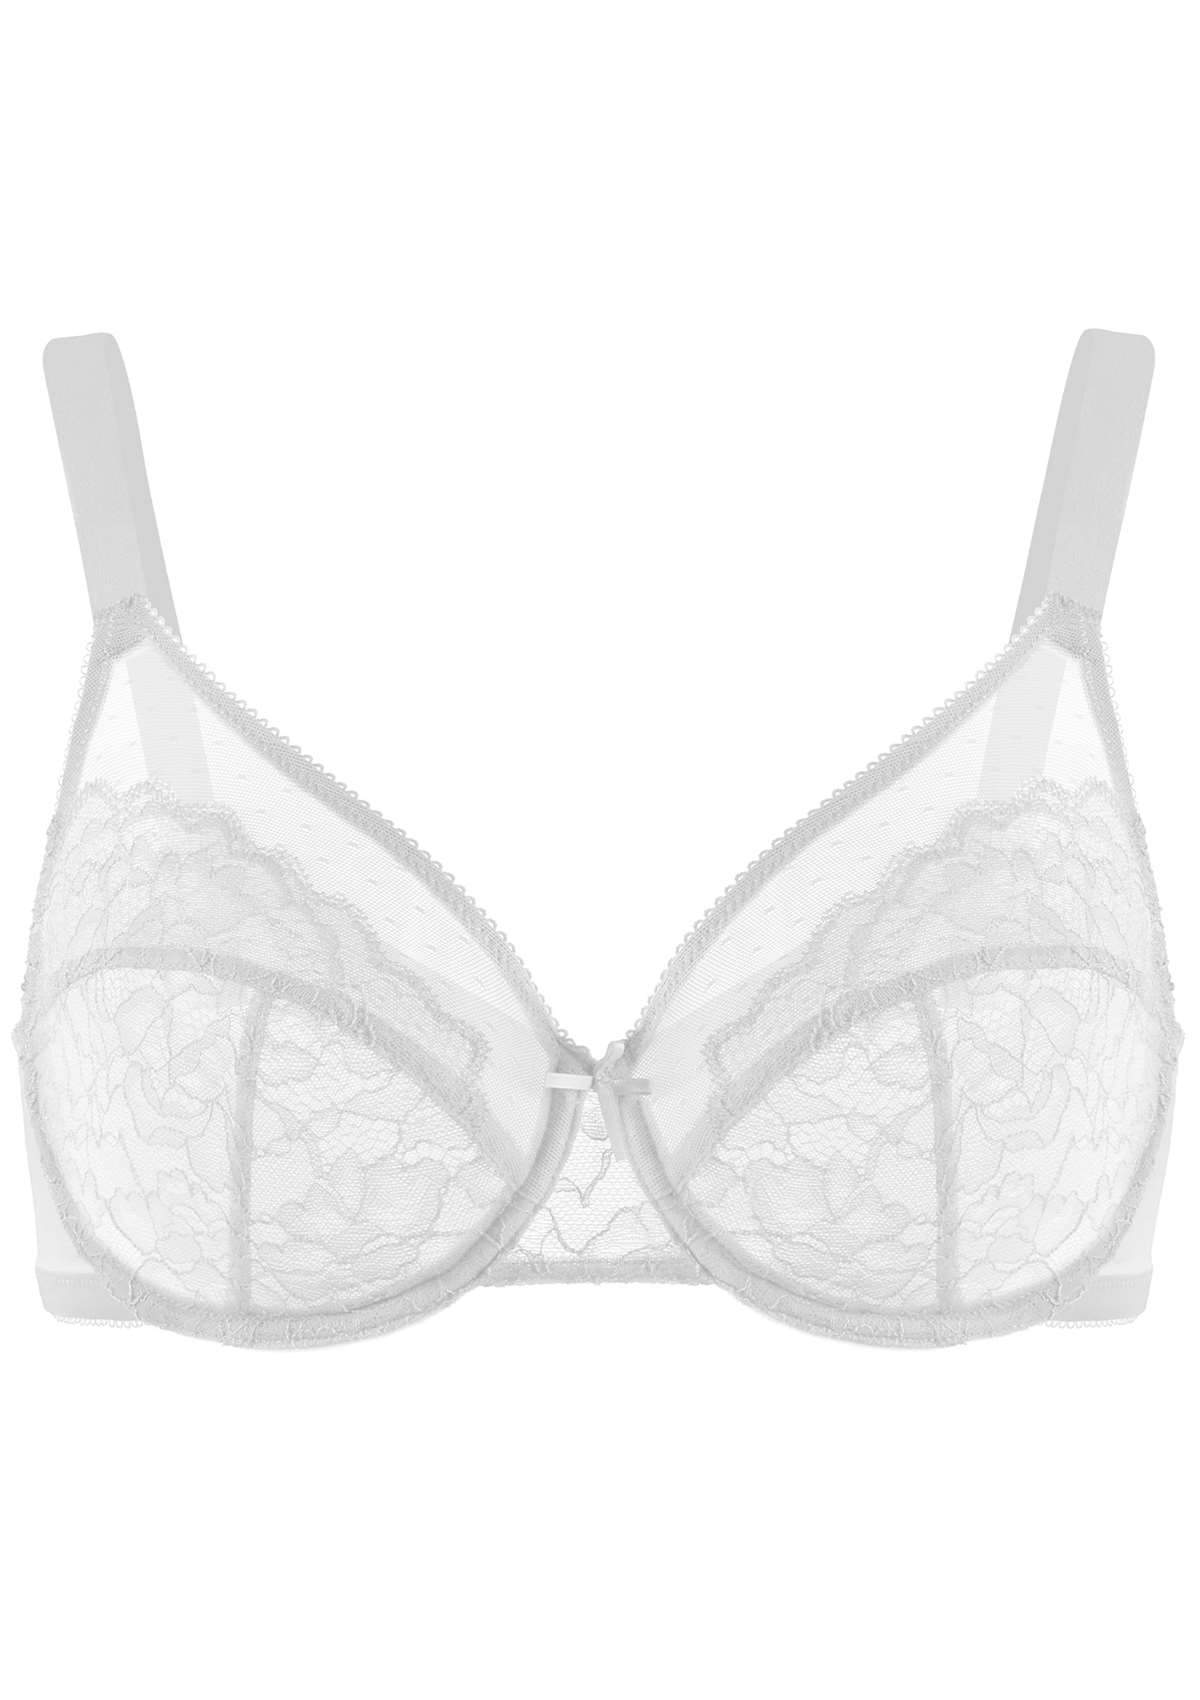 HSIA Enchante Lace Bra And Panties Set: Back Support Bra For Posture - Light Gray / 34 / D